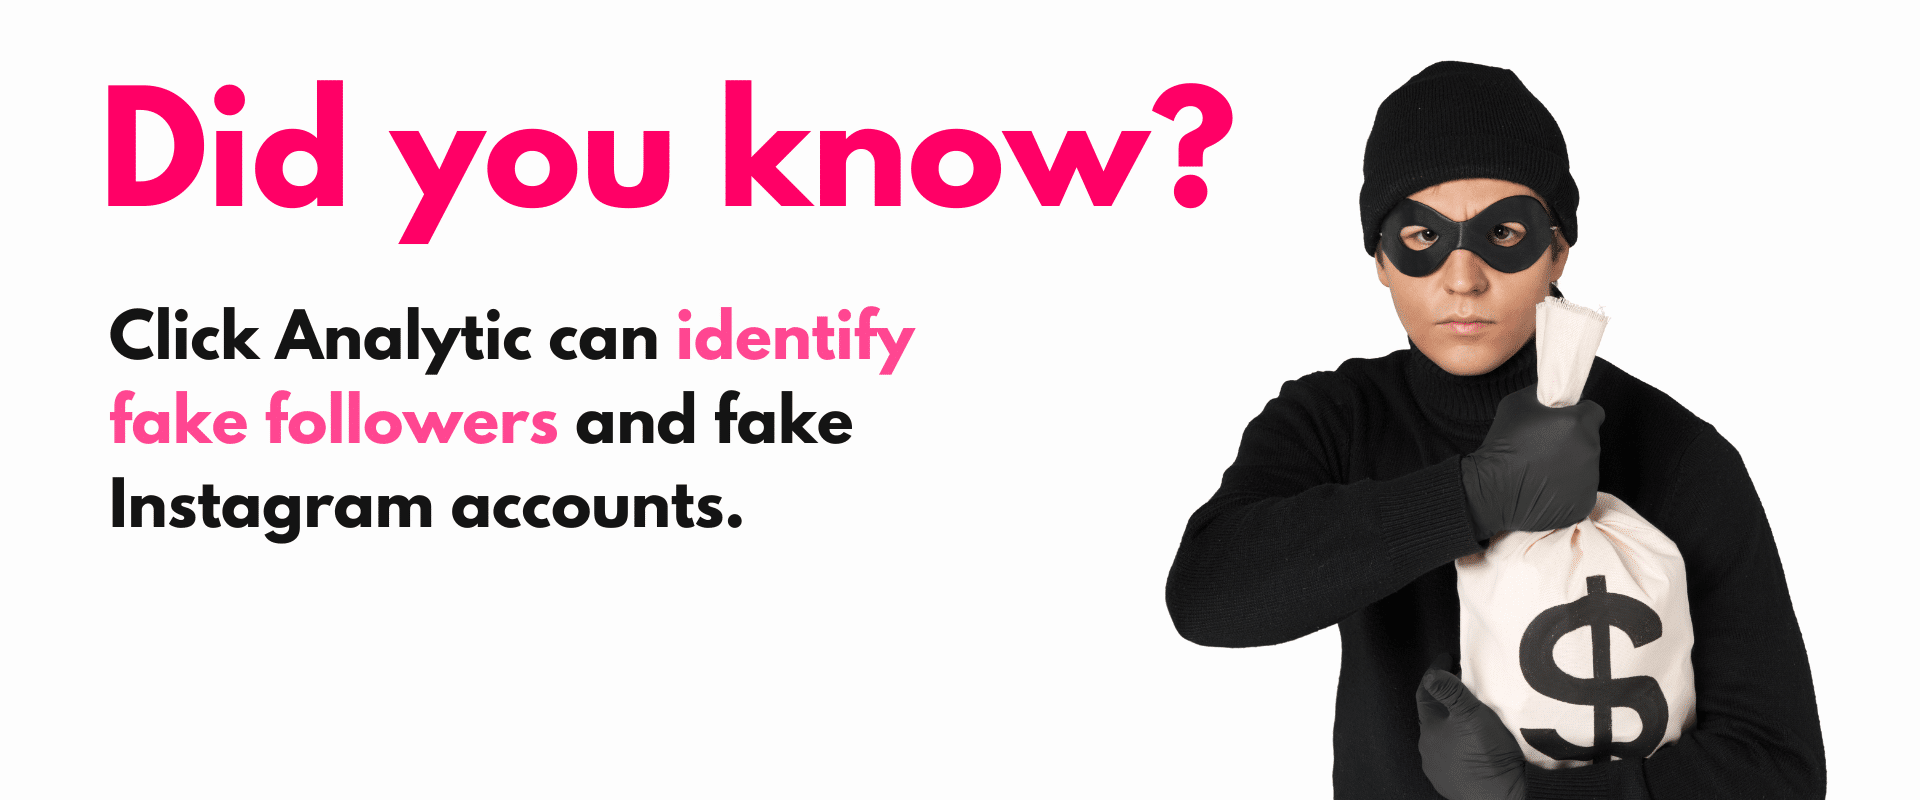 How to tell if an Instagram account is fake: Did you know? click analytics can identify fake followers and fake accounts.